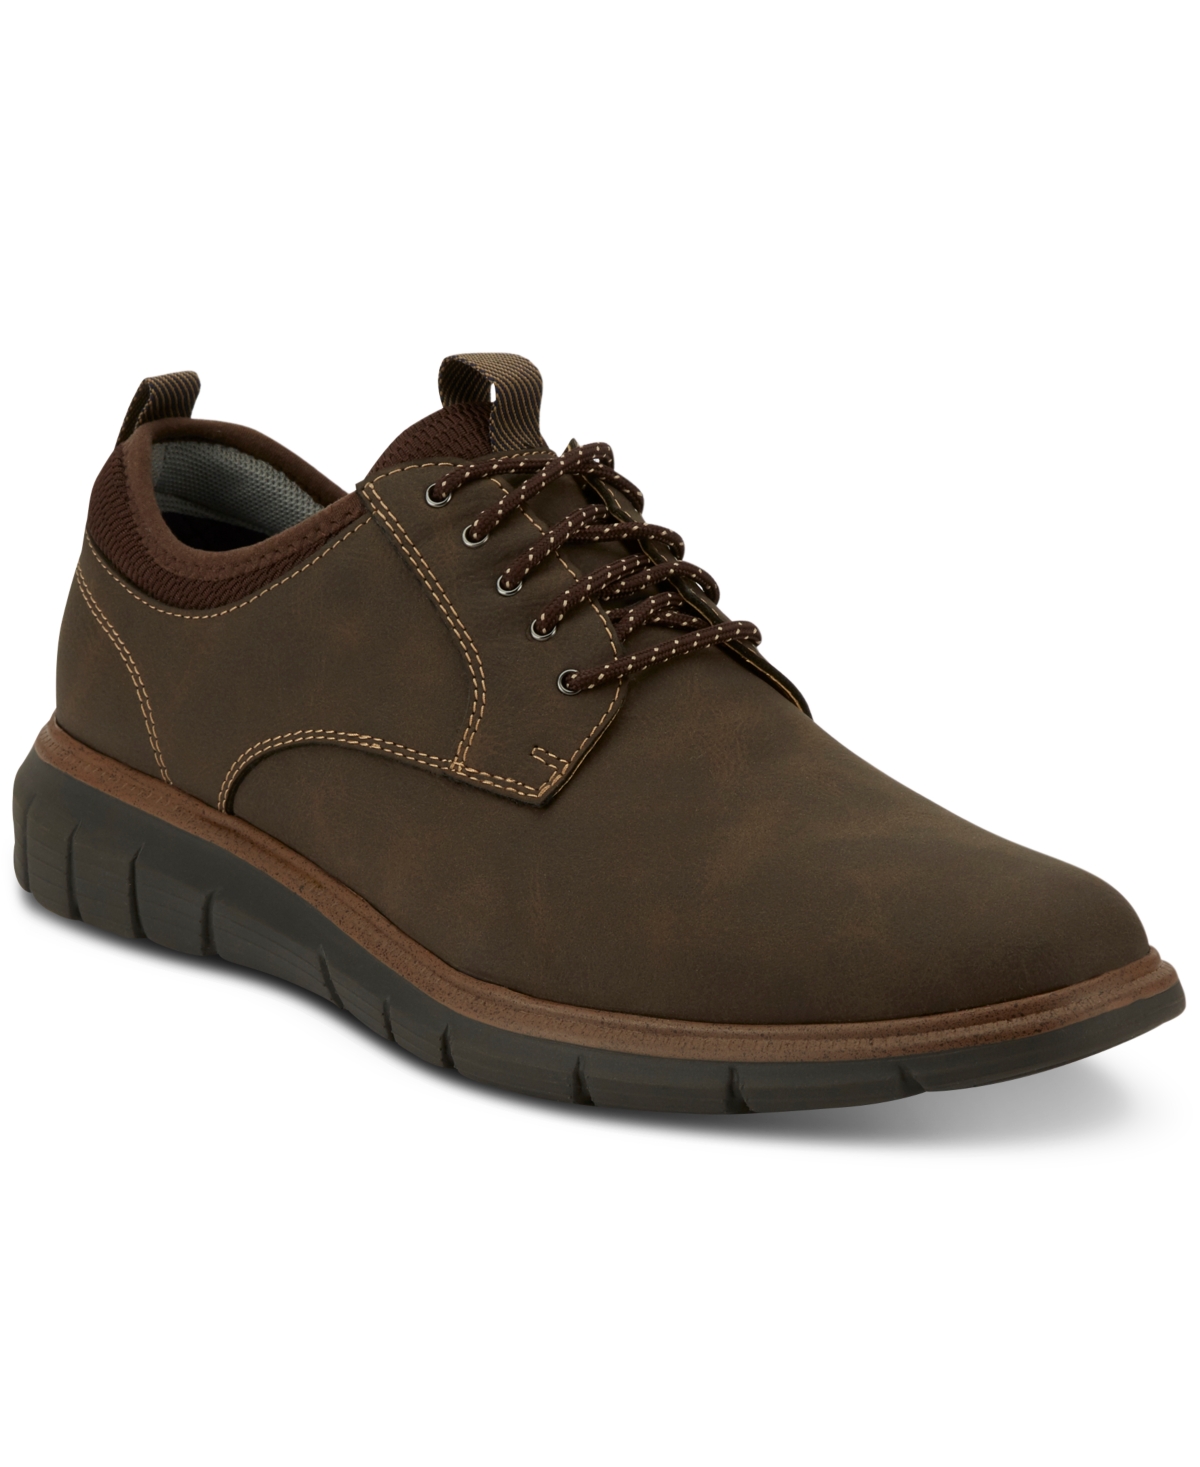 Men's Cooper Casual Lace-up Oxford - Dark Brown